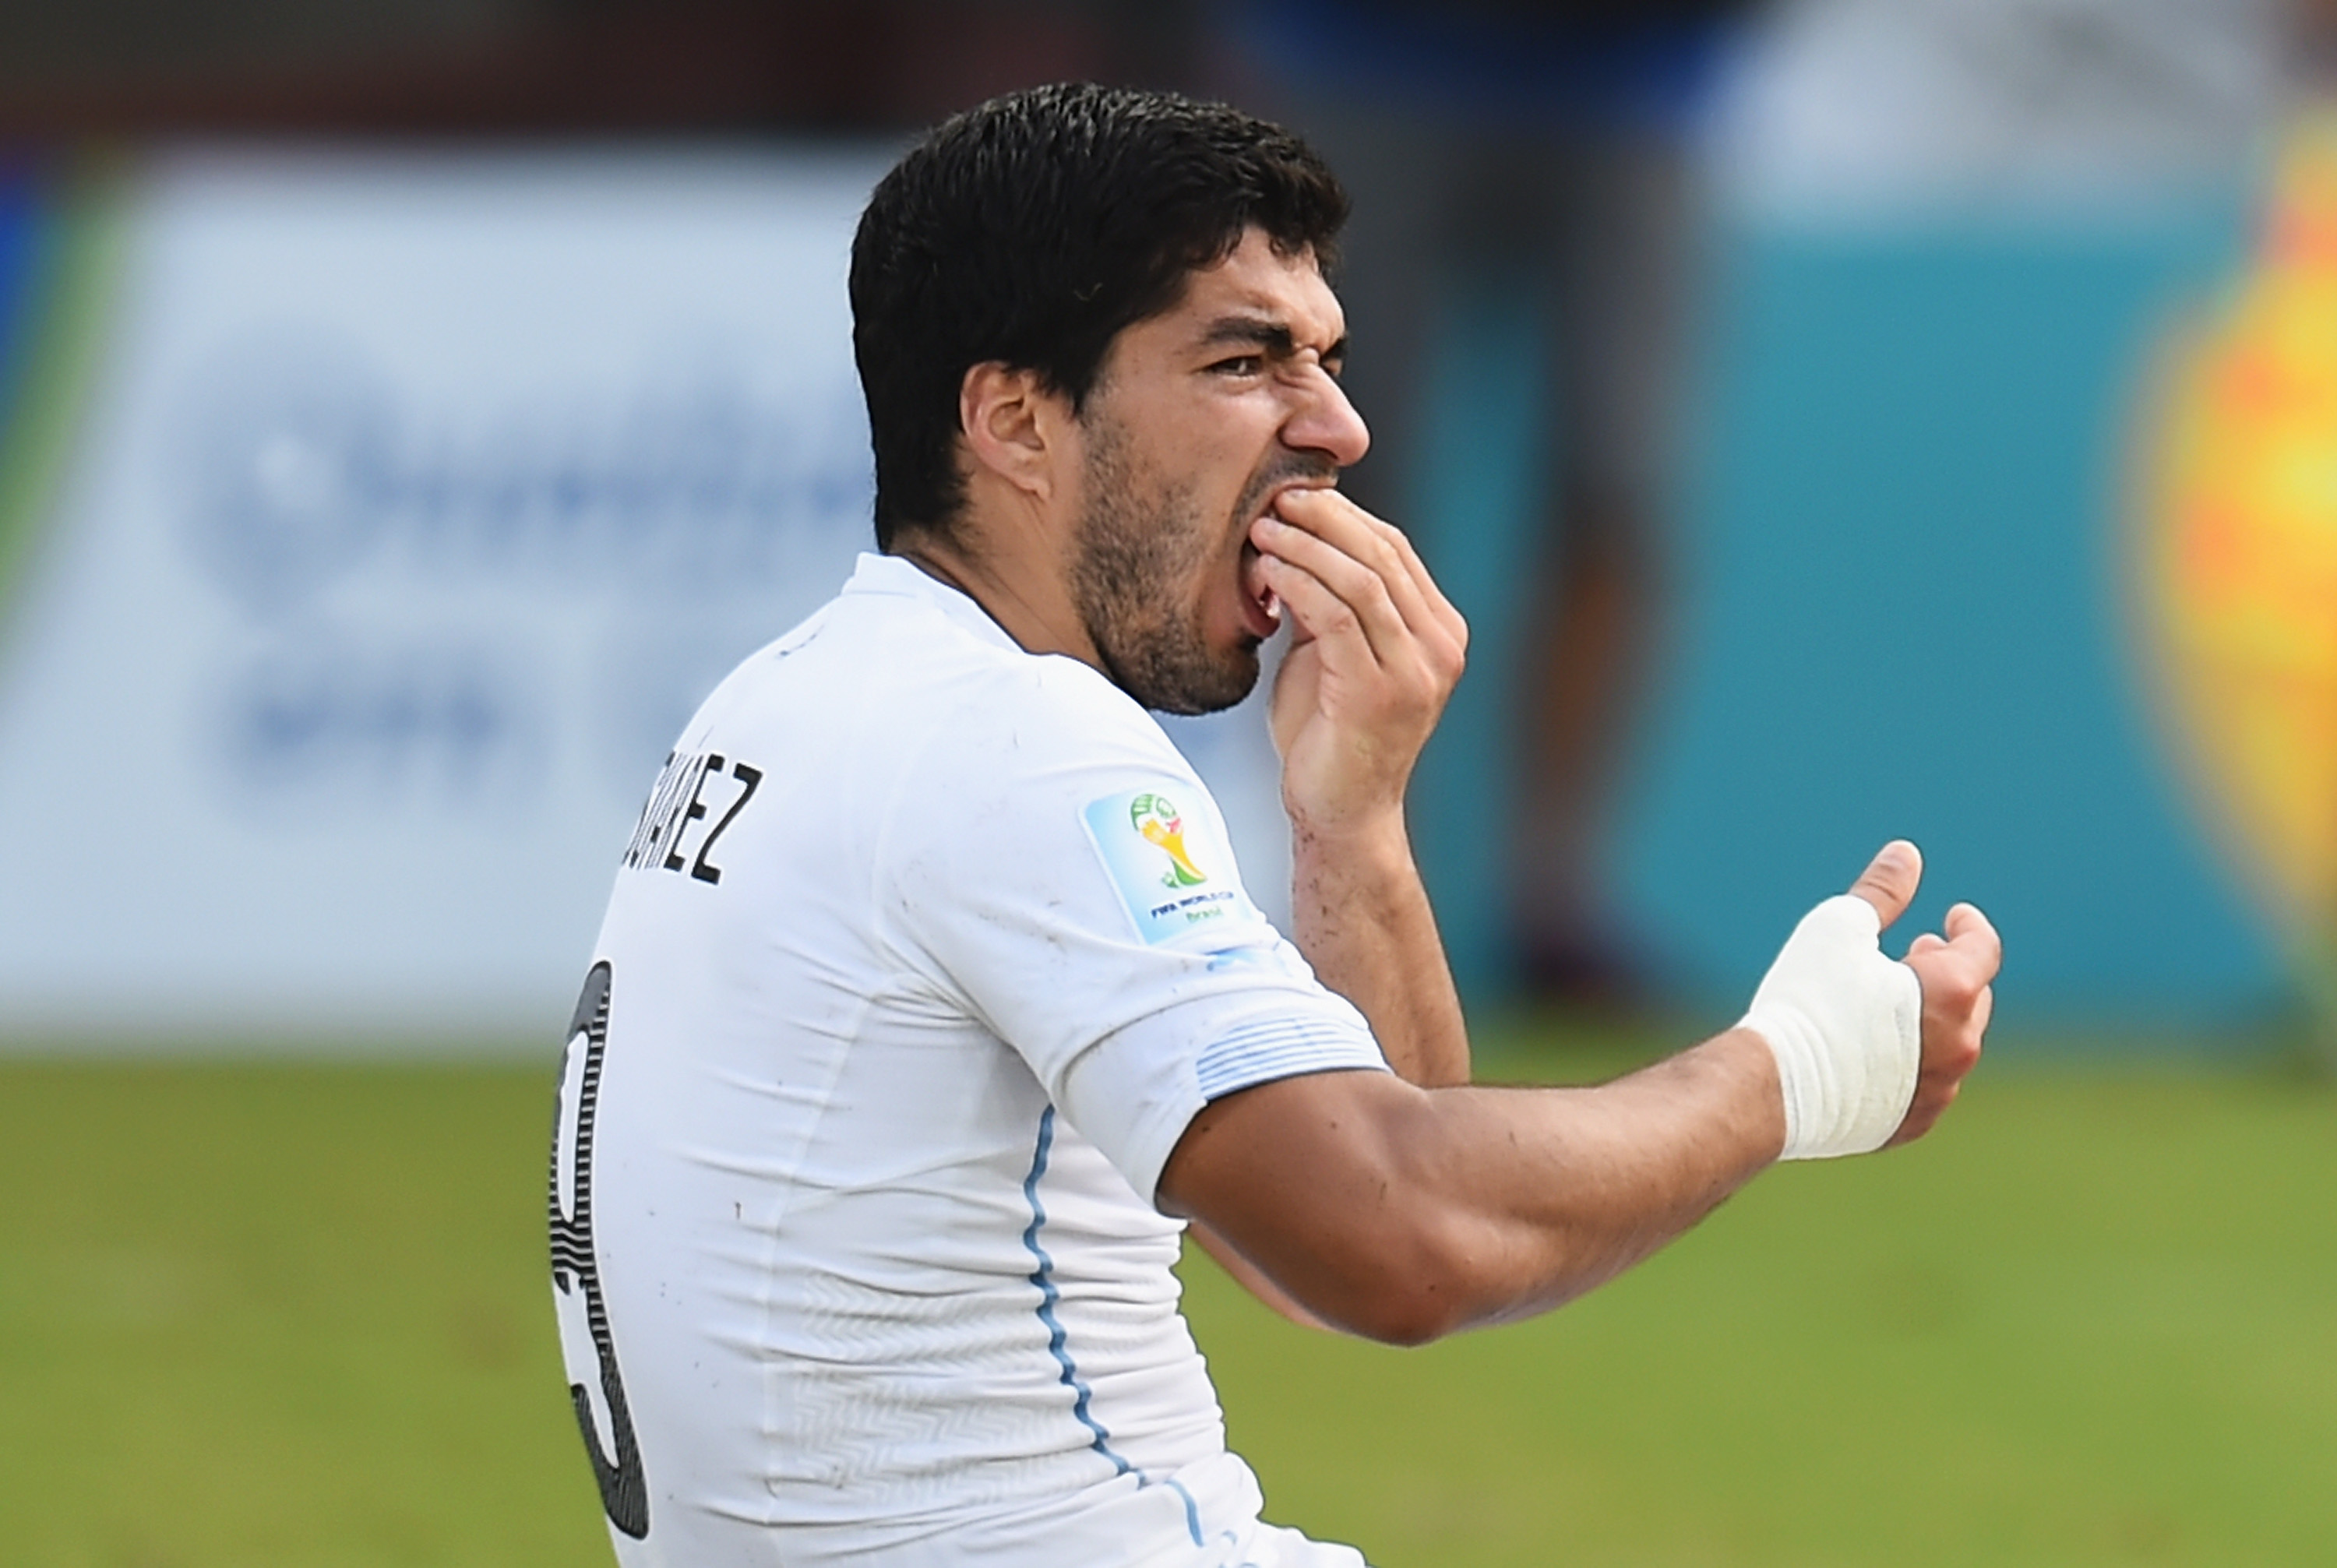 Luis Suarez of Uruguay reacts after biting Giorgio Chiellini of Italy during a 2014 FIFA World Cup match on June 24 in Natal, Brazil. (Shaun Botterill—FIFA/Getty Images)